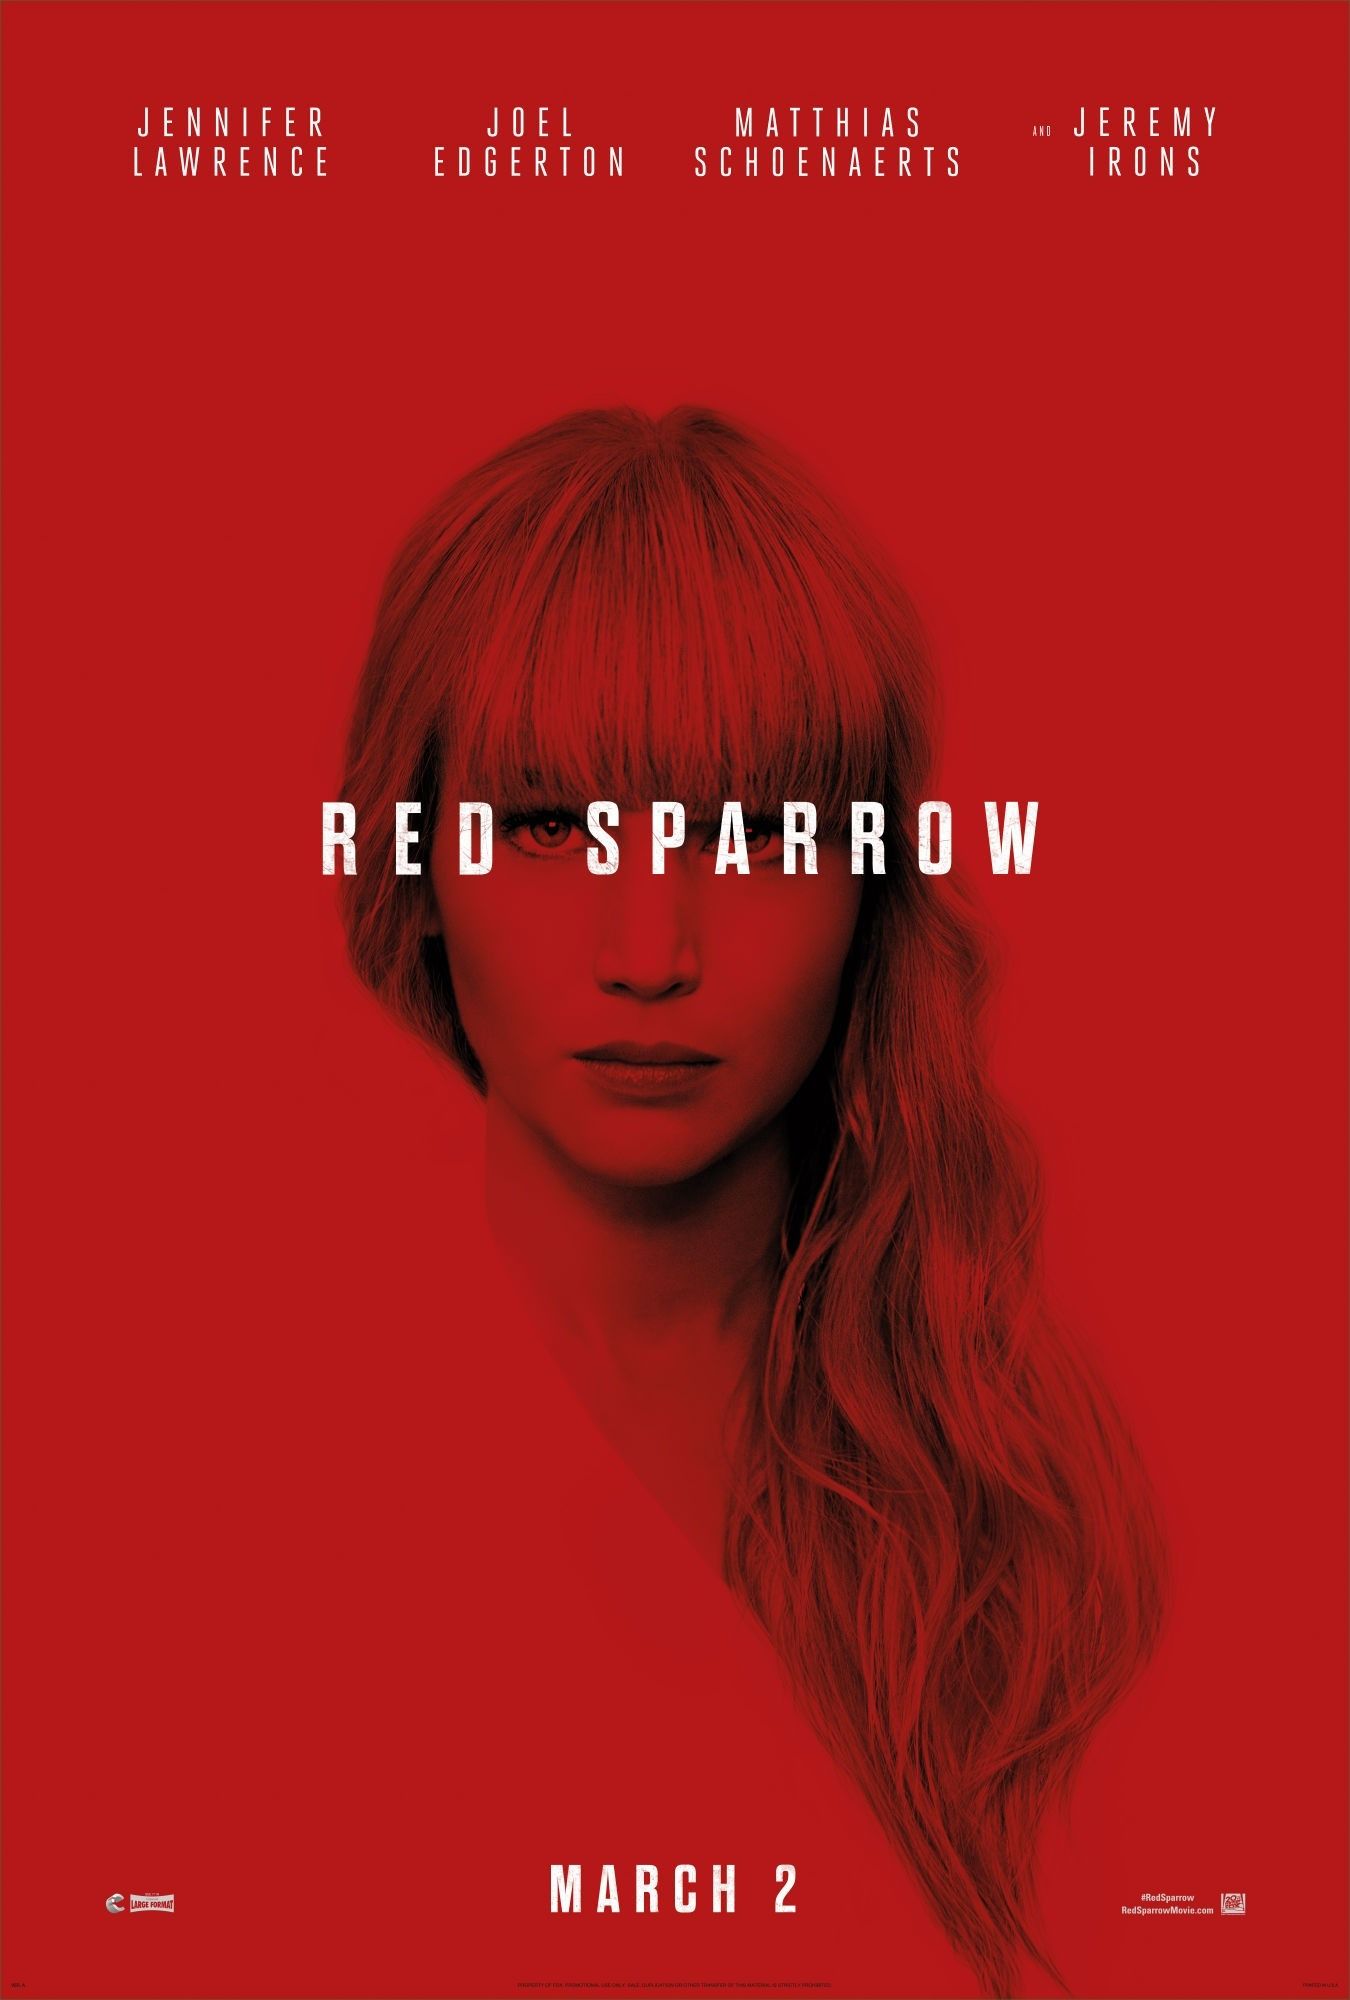 Red-Sparrow-Poster-001.jpg